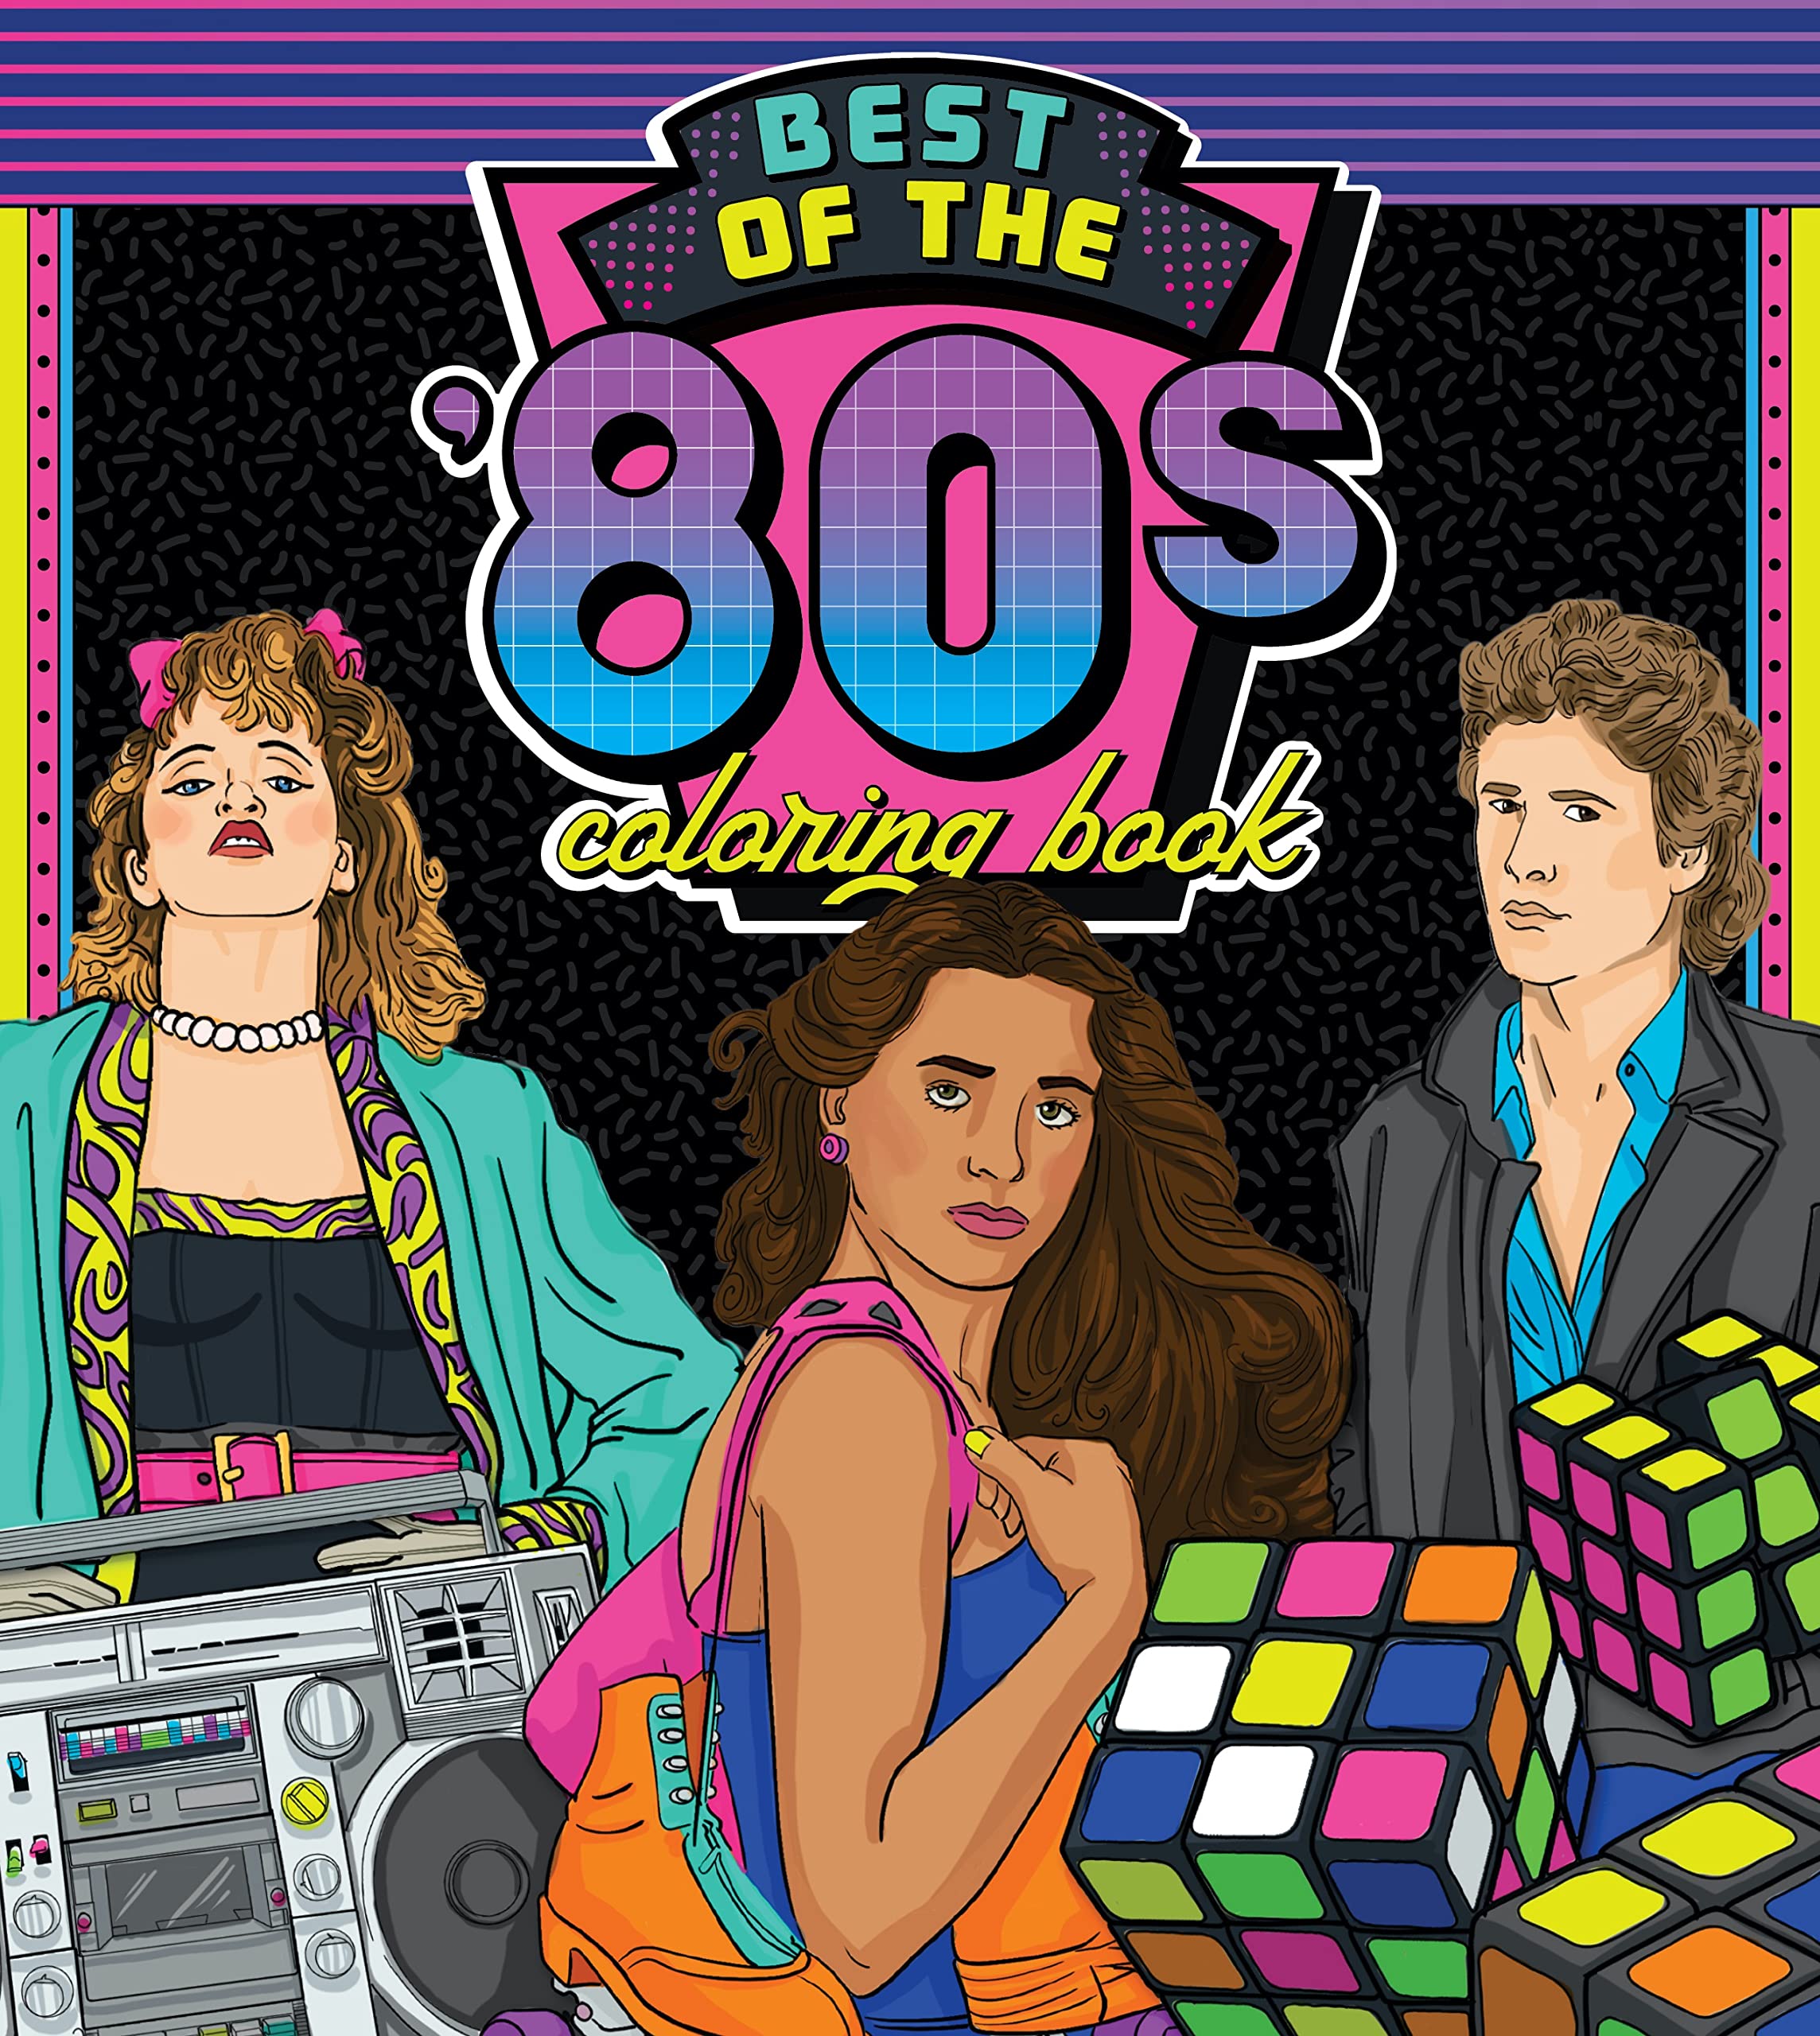 The Best of the 80's Coloring Book